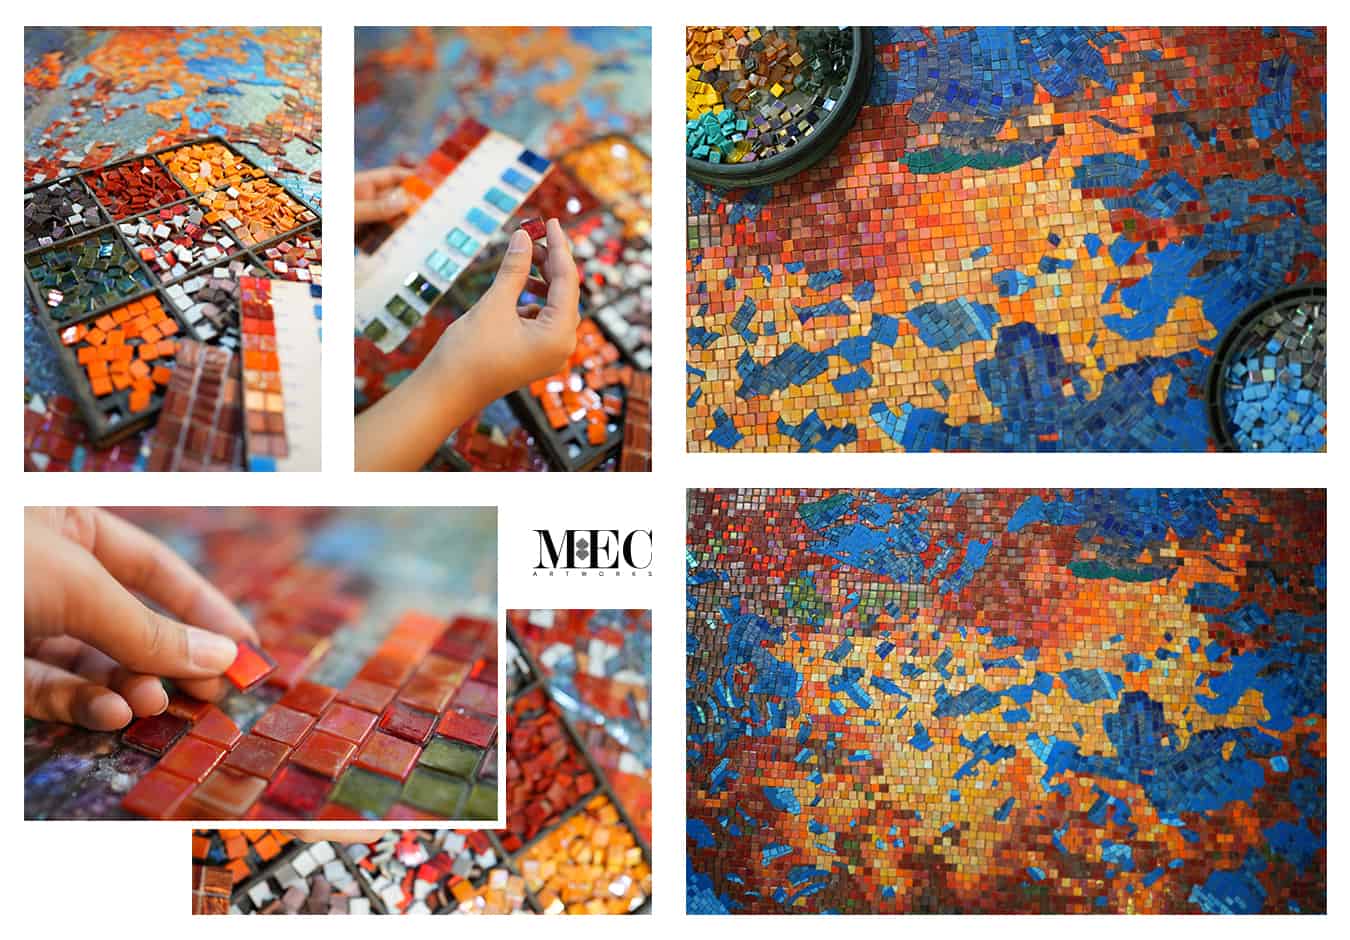 A collage of five images showcasing the process and result of creating a colorful mosaic artwork. The images include hands placing small, colorful tiles to form a design, and the completed vibrant mosaic pieces.